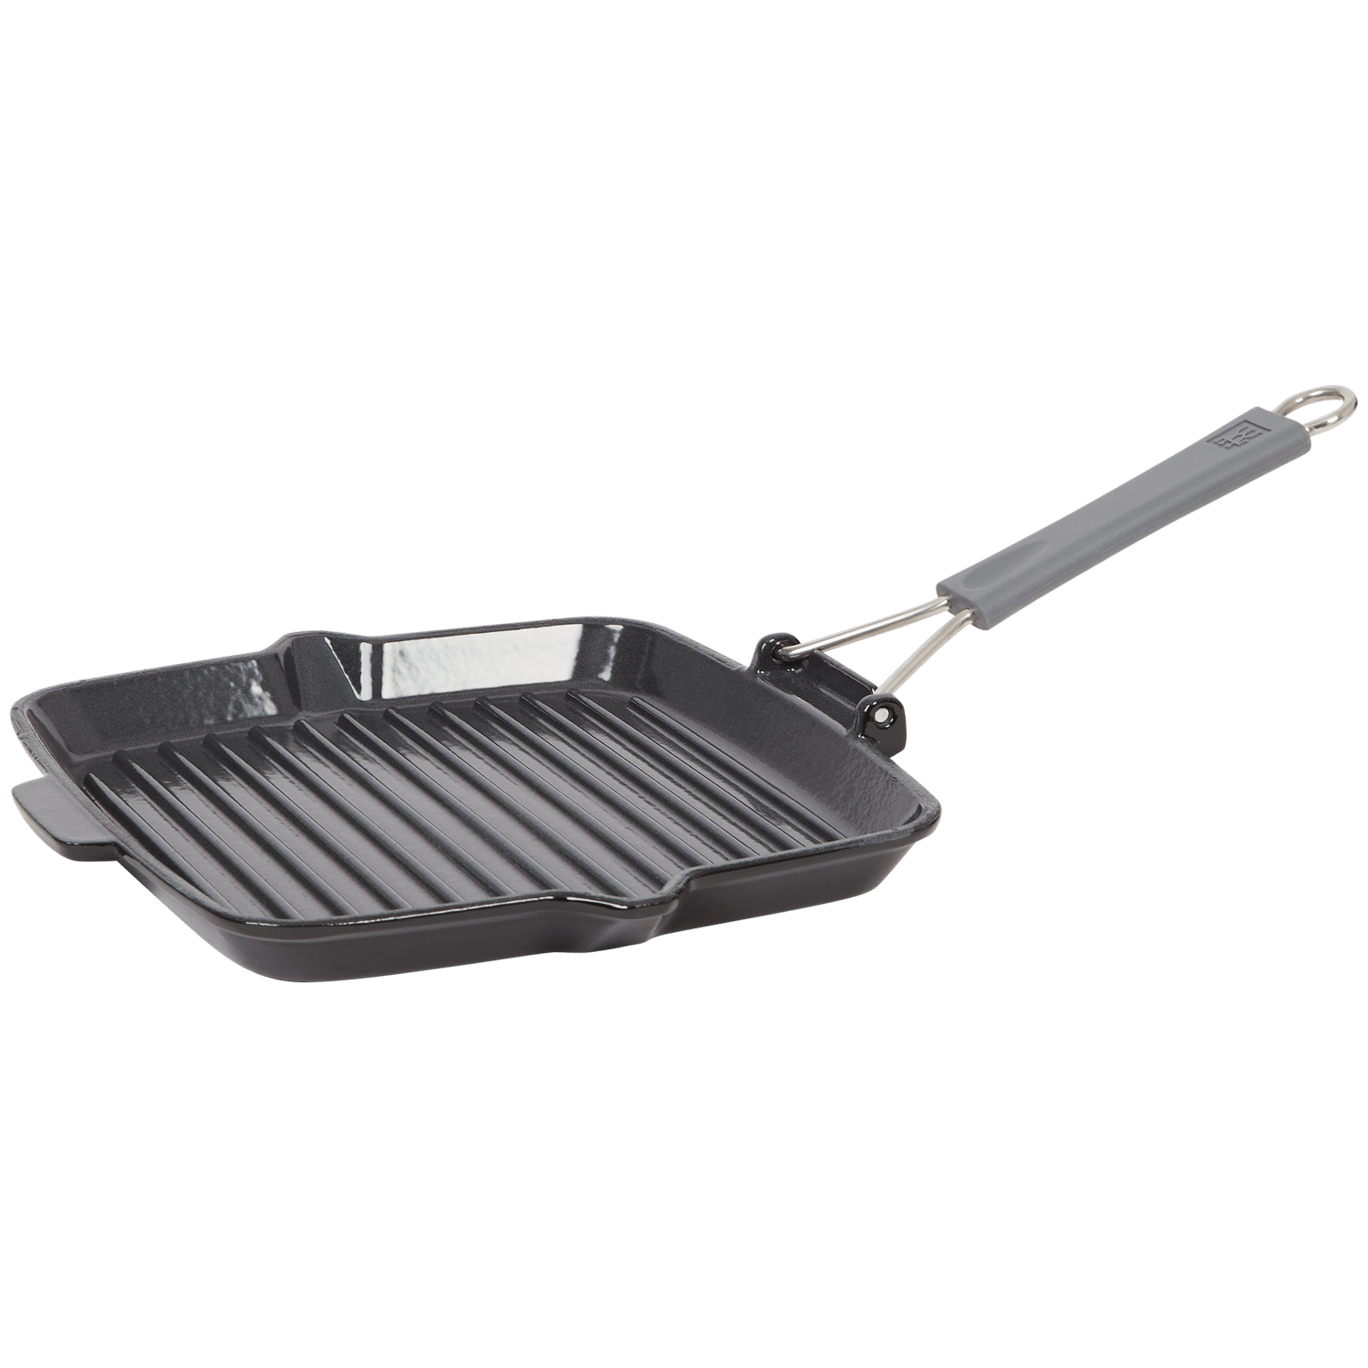 Zwilling grillpan